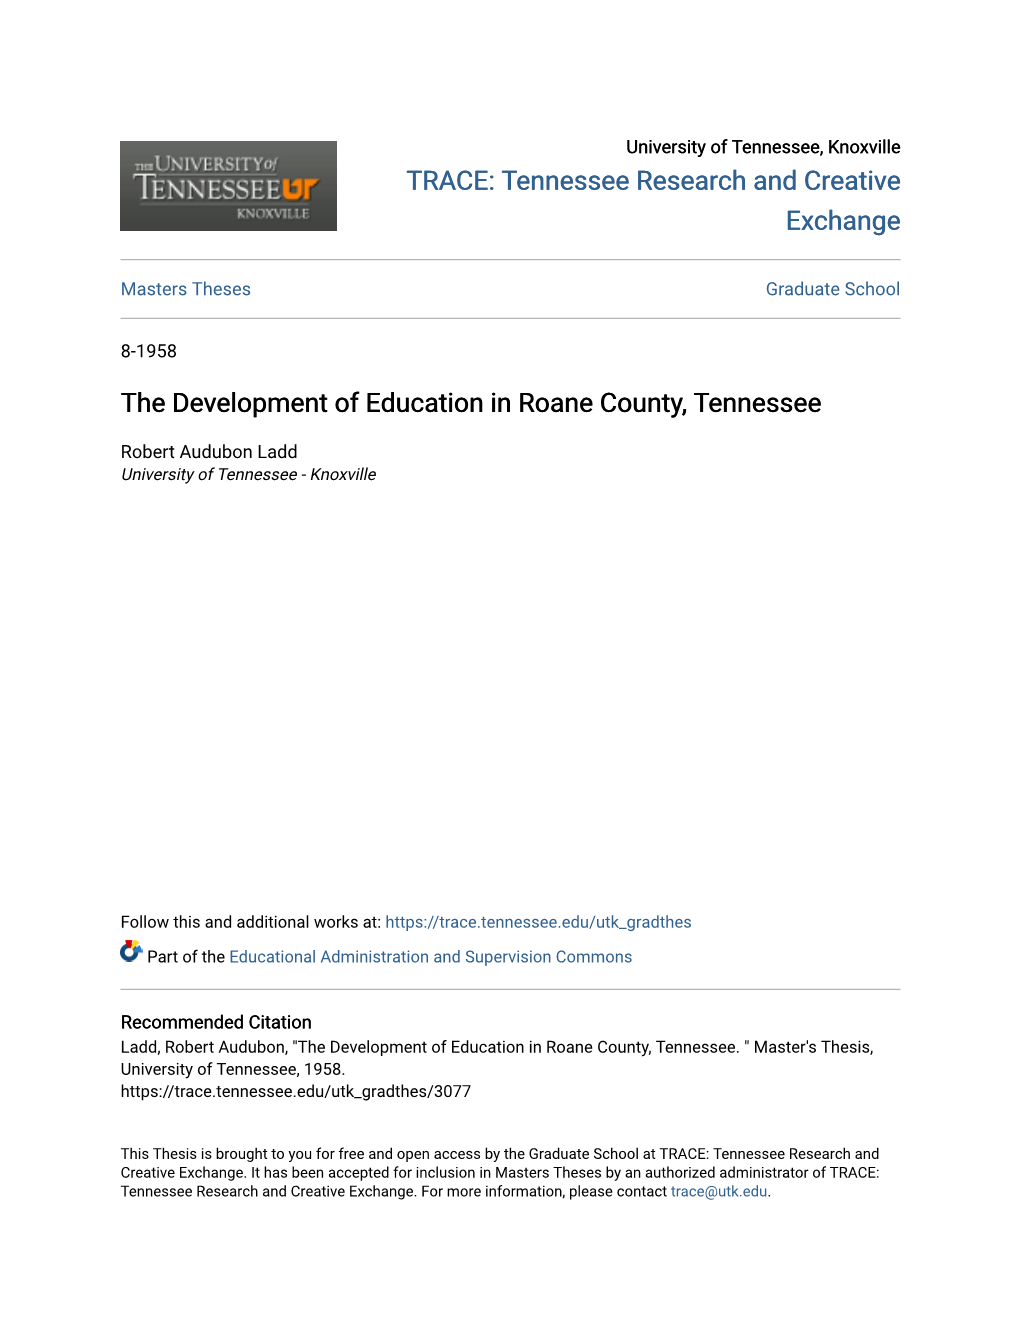 The Development of Education in Roane County, Tennessee